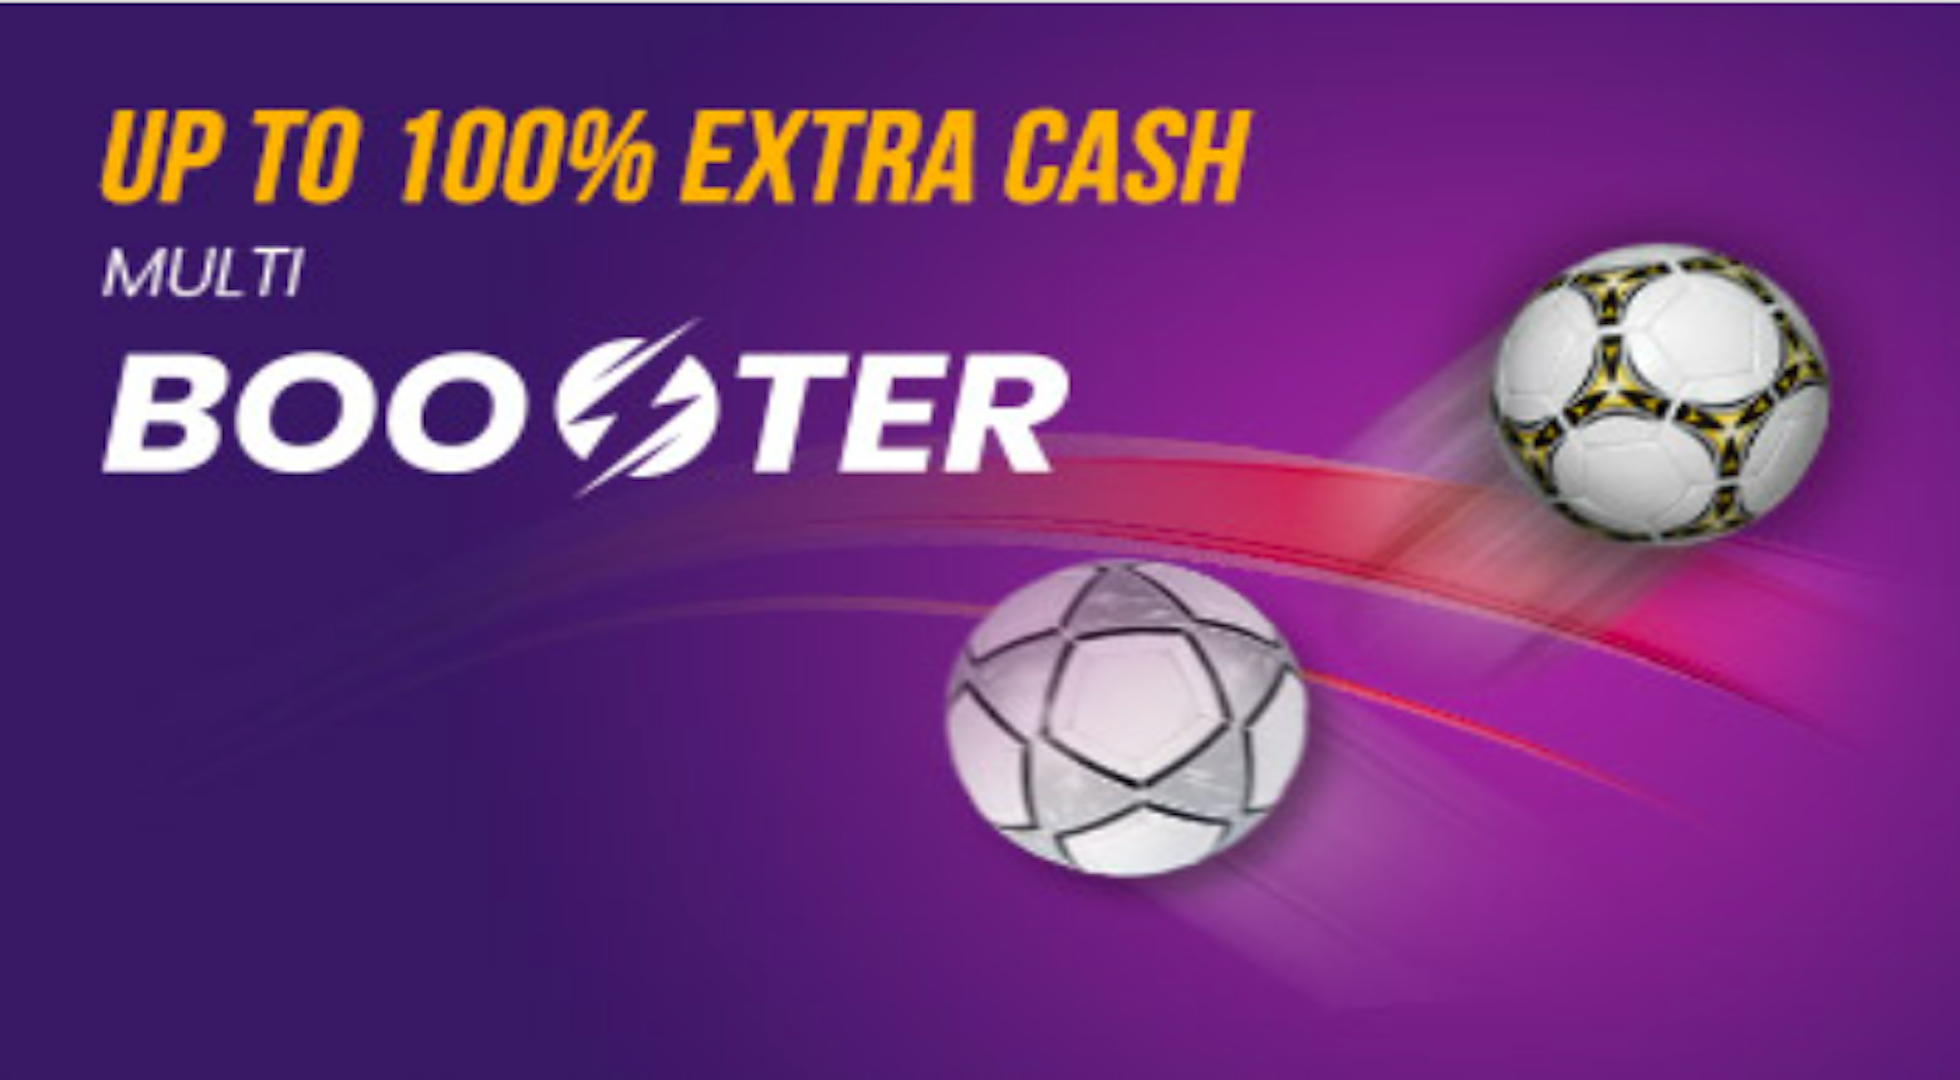 Up tp 100% Extra Cash at Vbet Multi Booster